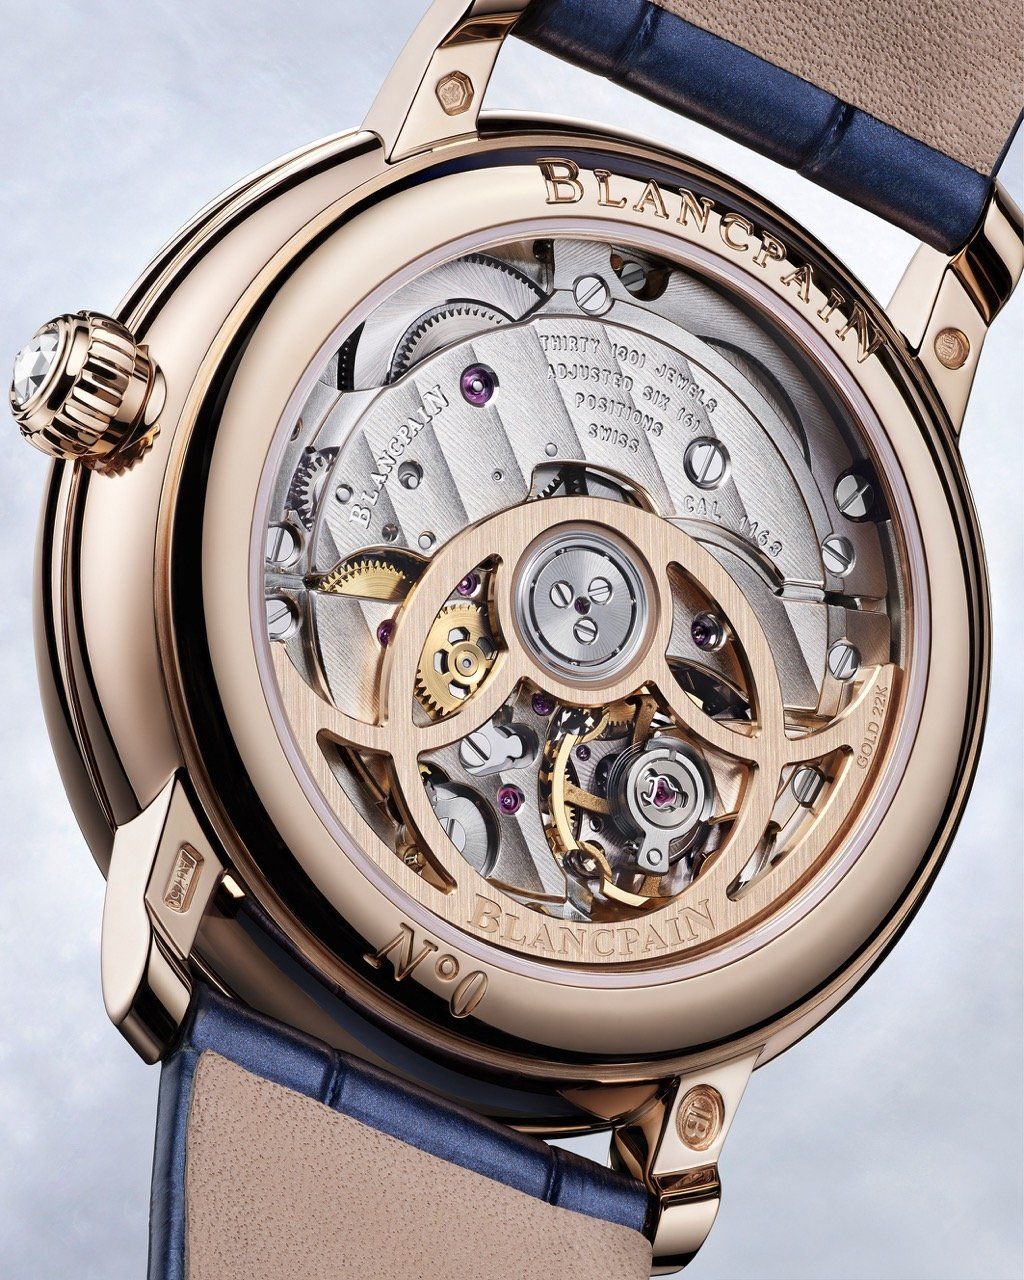 Blancpain’s caliber 1163 and caliber 1163L power the small seconds and moon-phase models